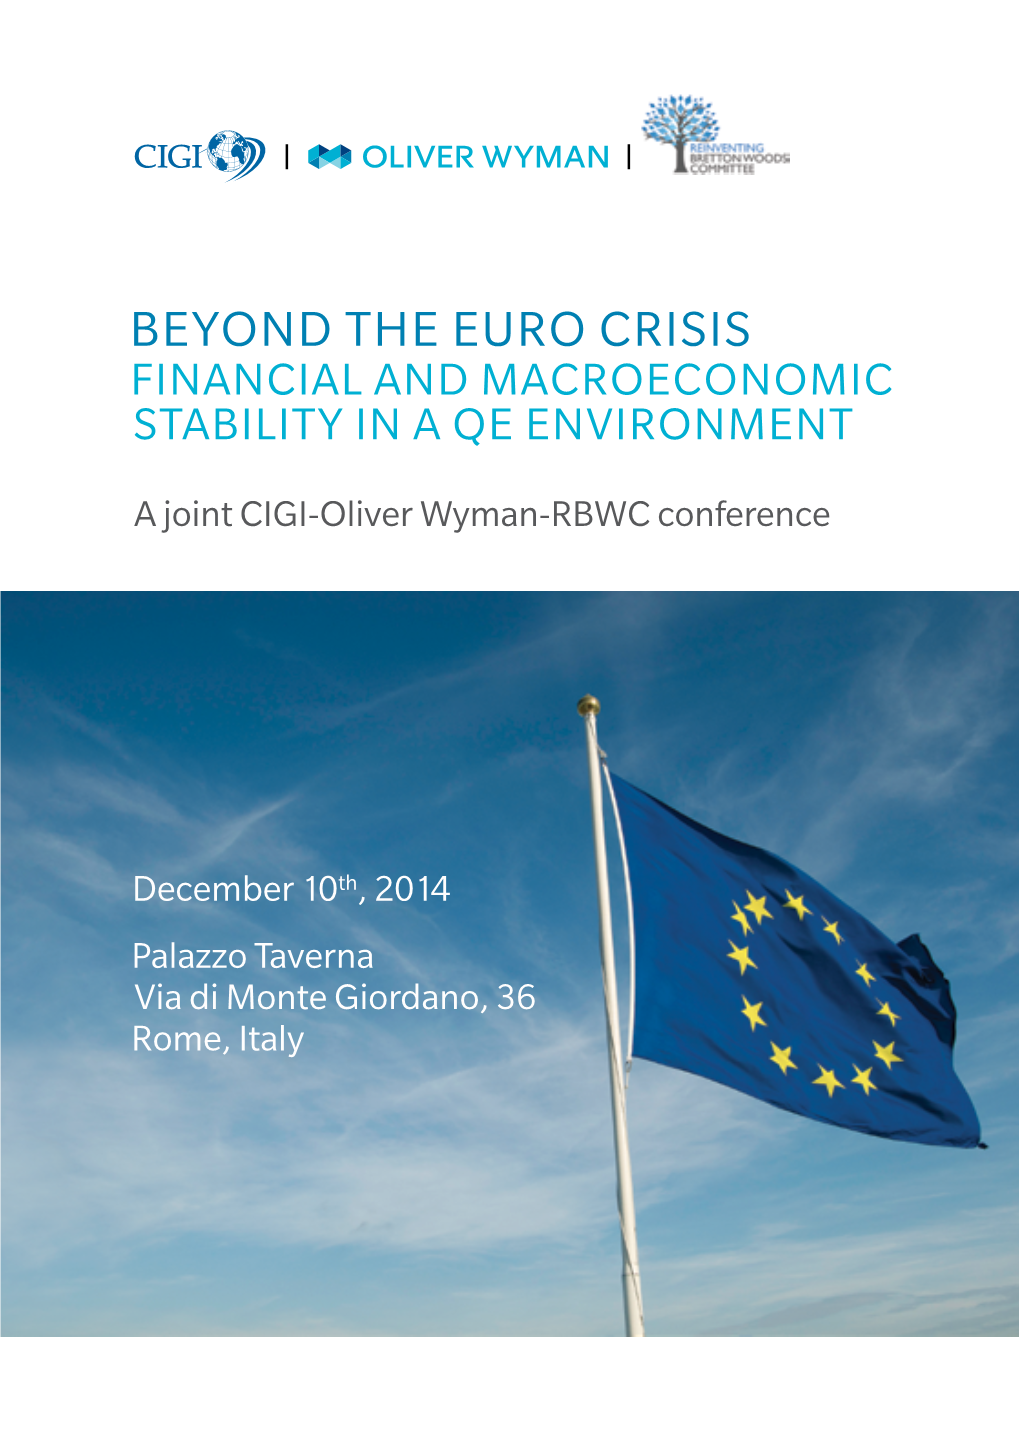 Beyond the Euro Crisis Financial and Macroeconomic Stability in a Qe Environment